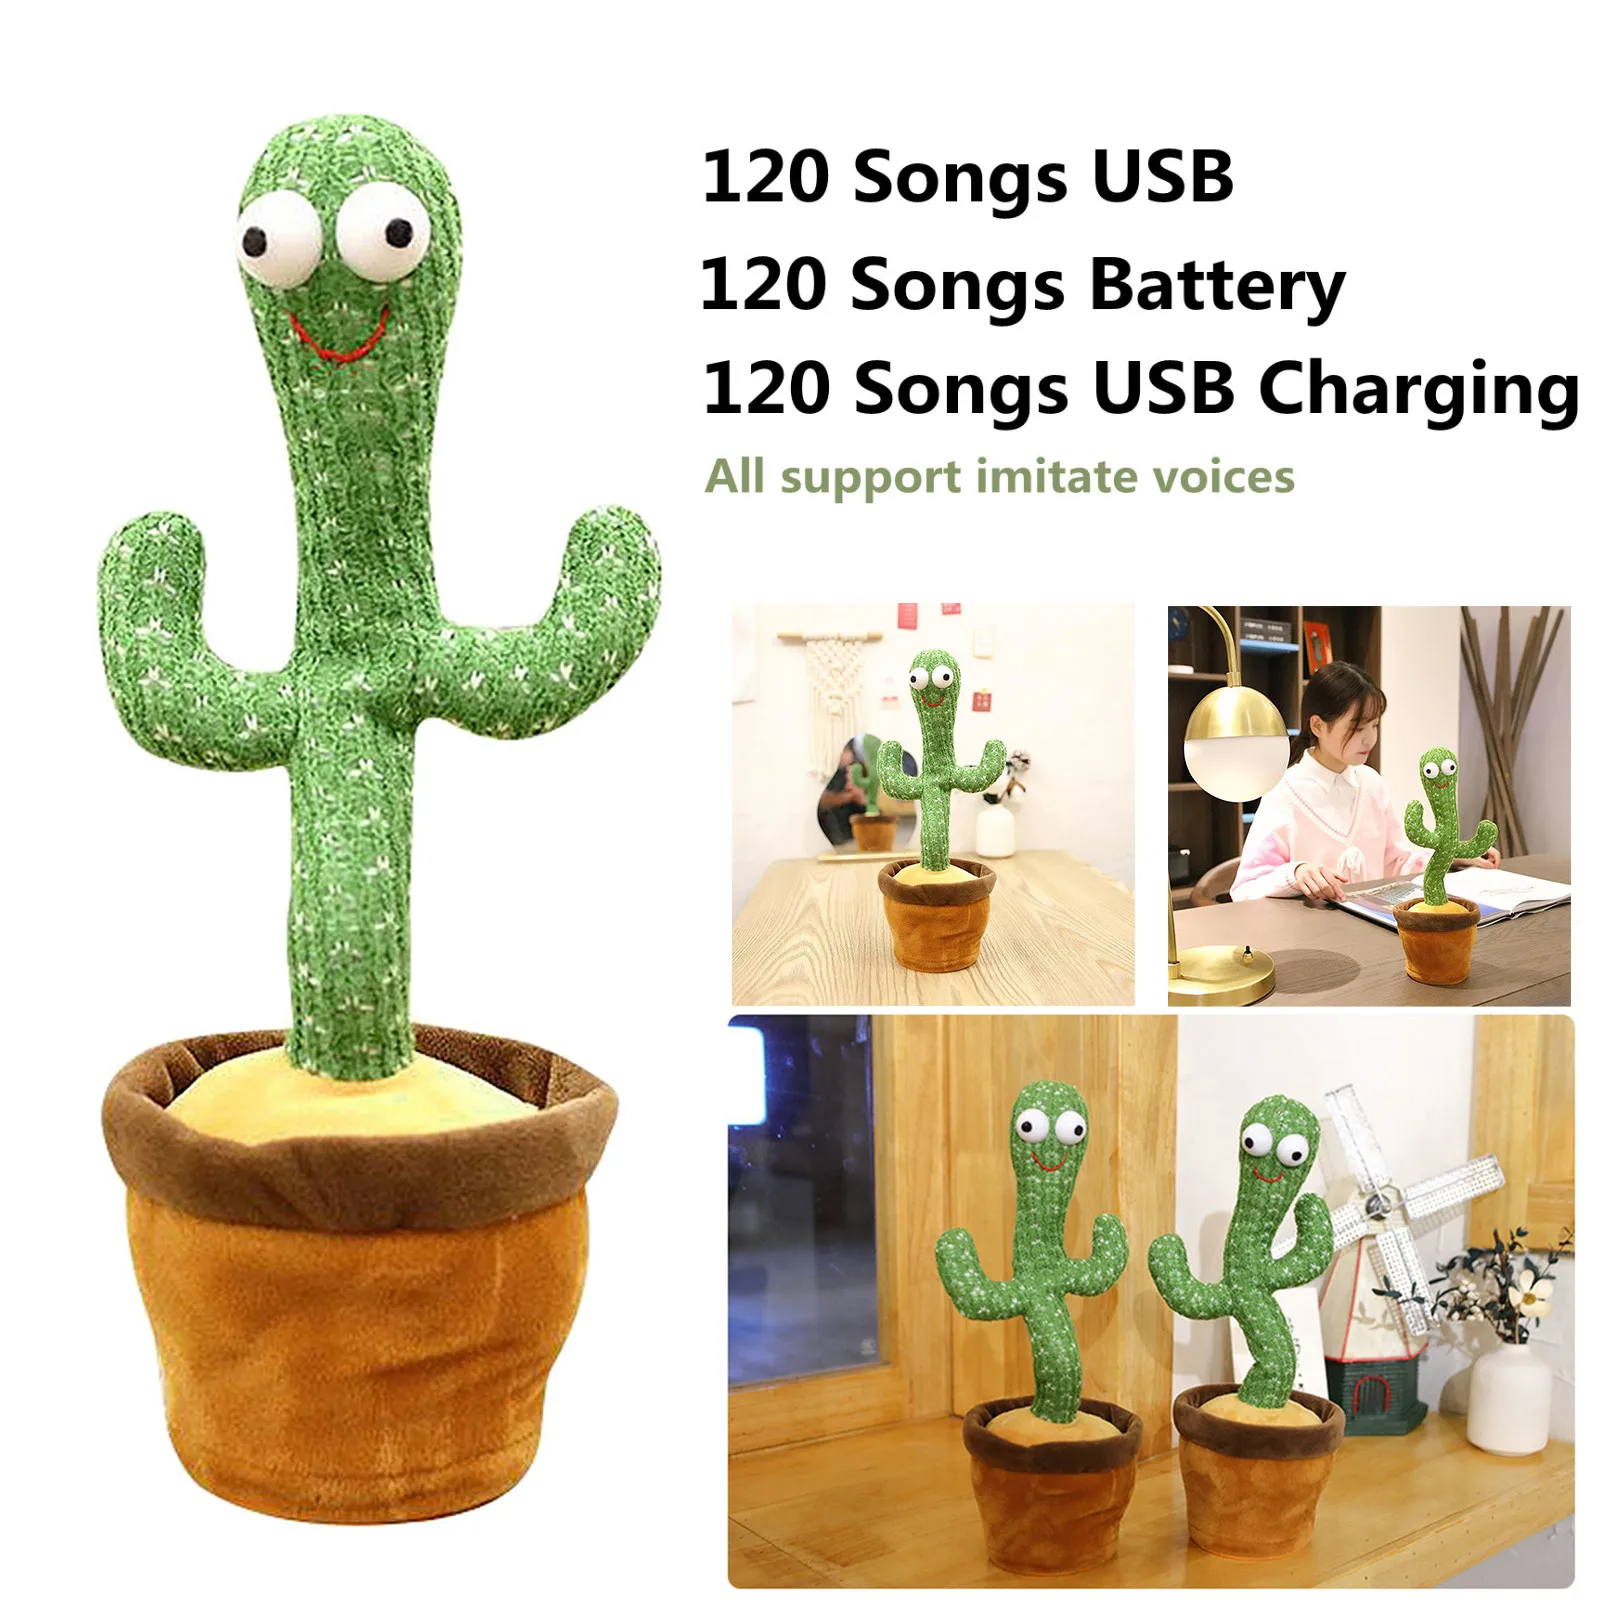 

Cute Electric Cactus Plush Doll Twist Dancing Toy Decor Recording Parrot USB Cactus Plush Toy Funny Dancing Singing Toy